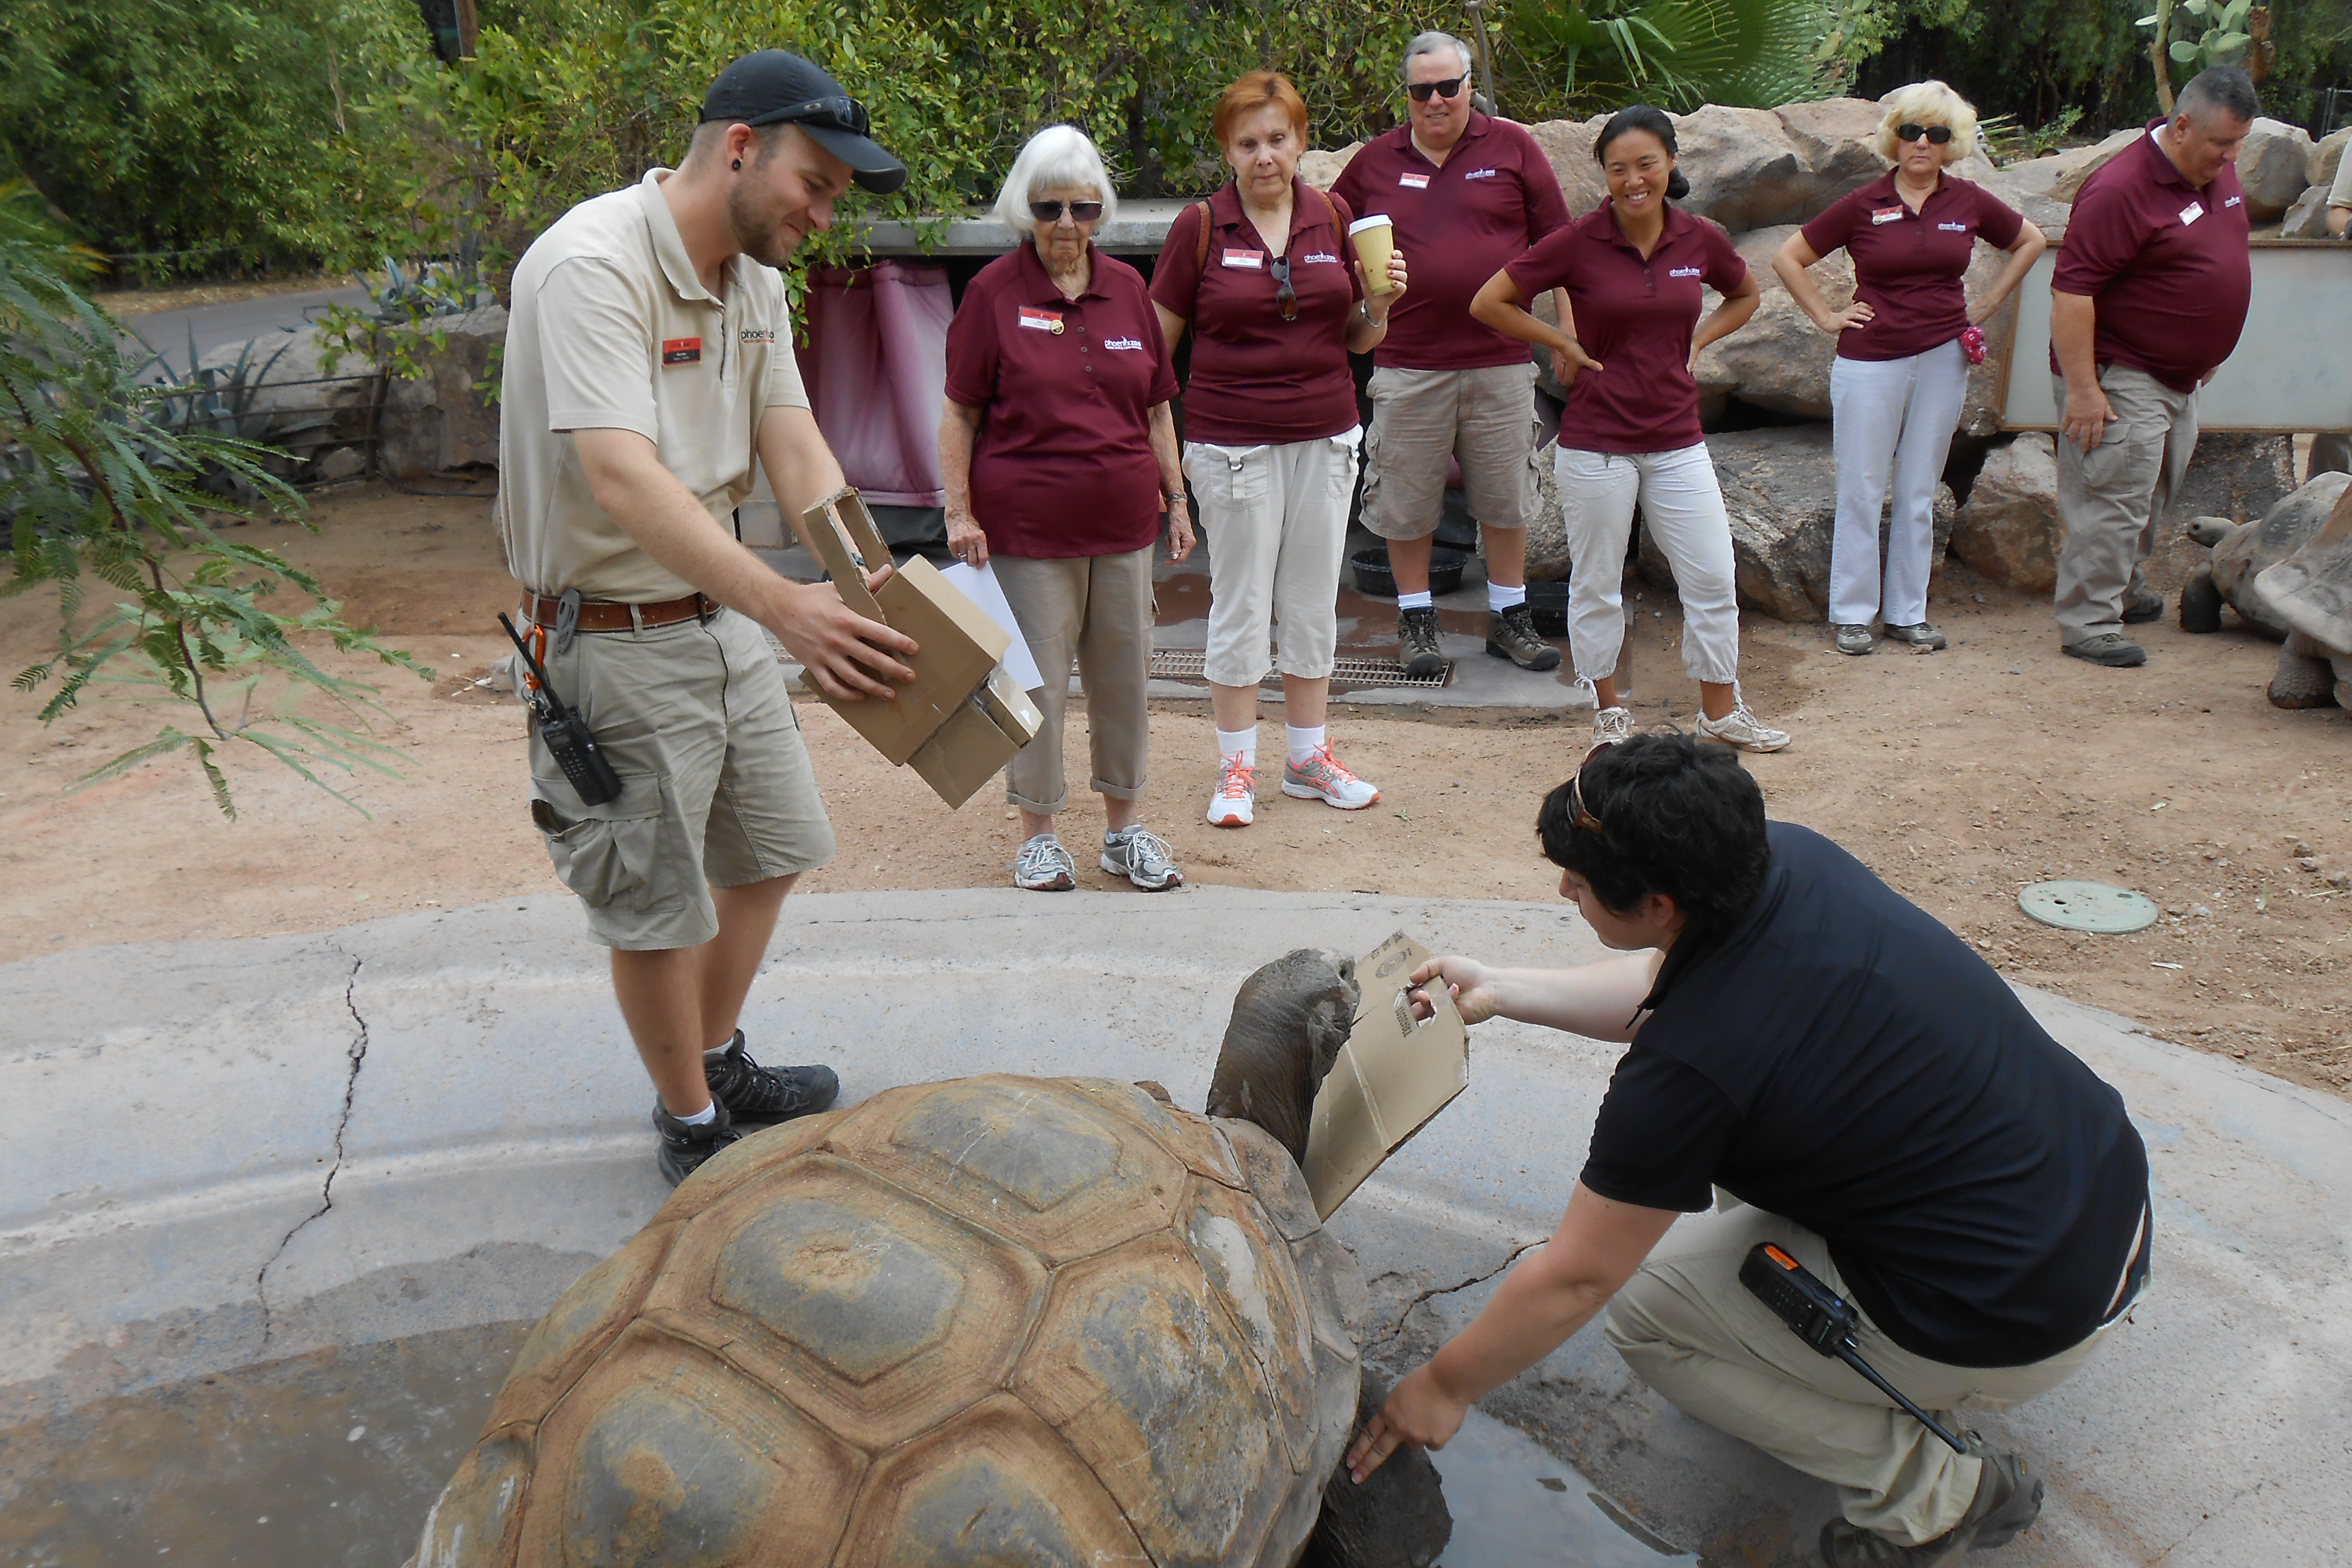 Tortoise Team members receiving instructions from zookeepers in the tortoise exhibit.